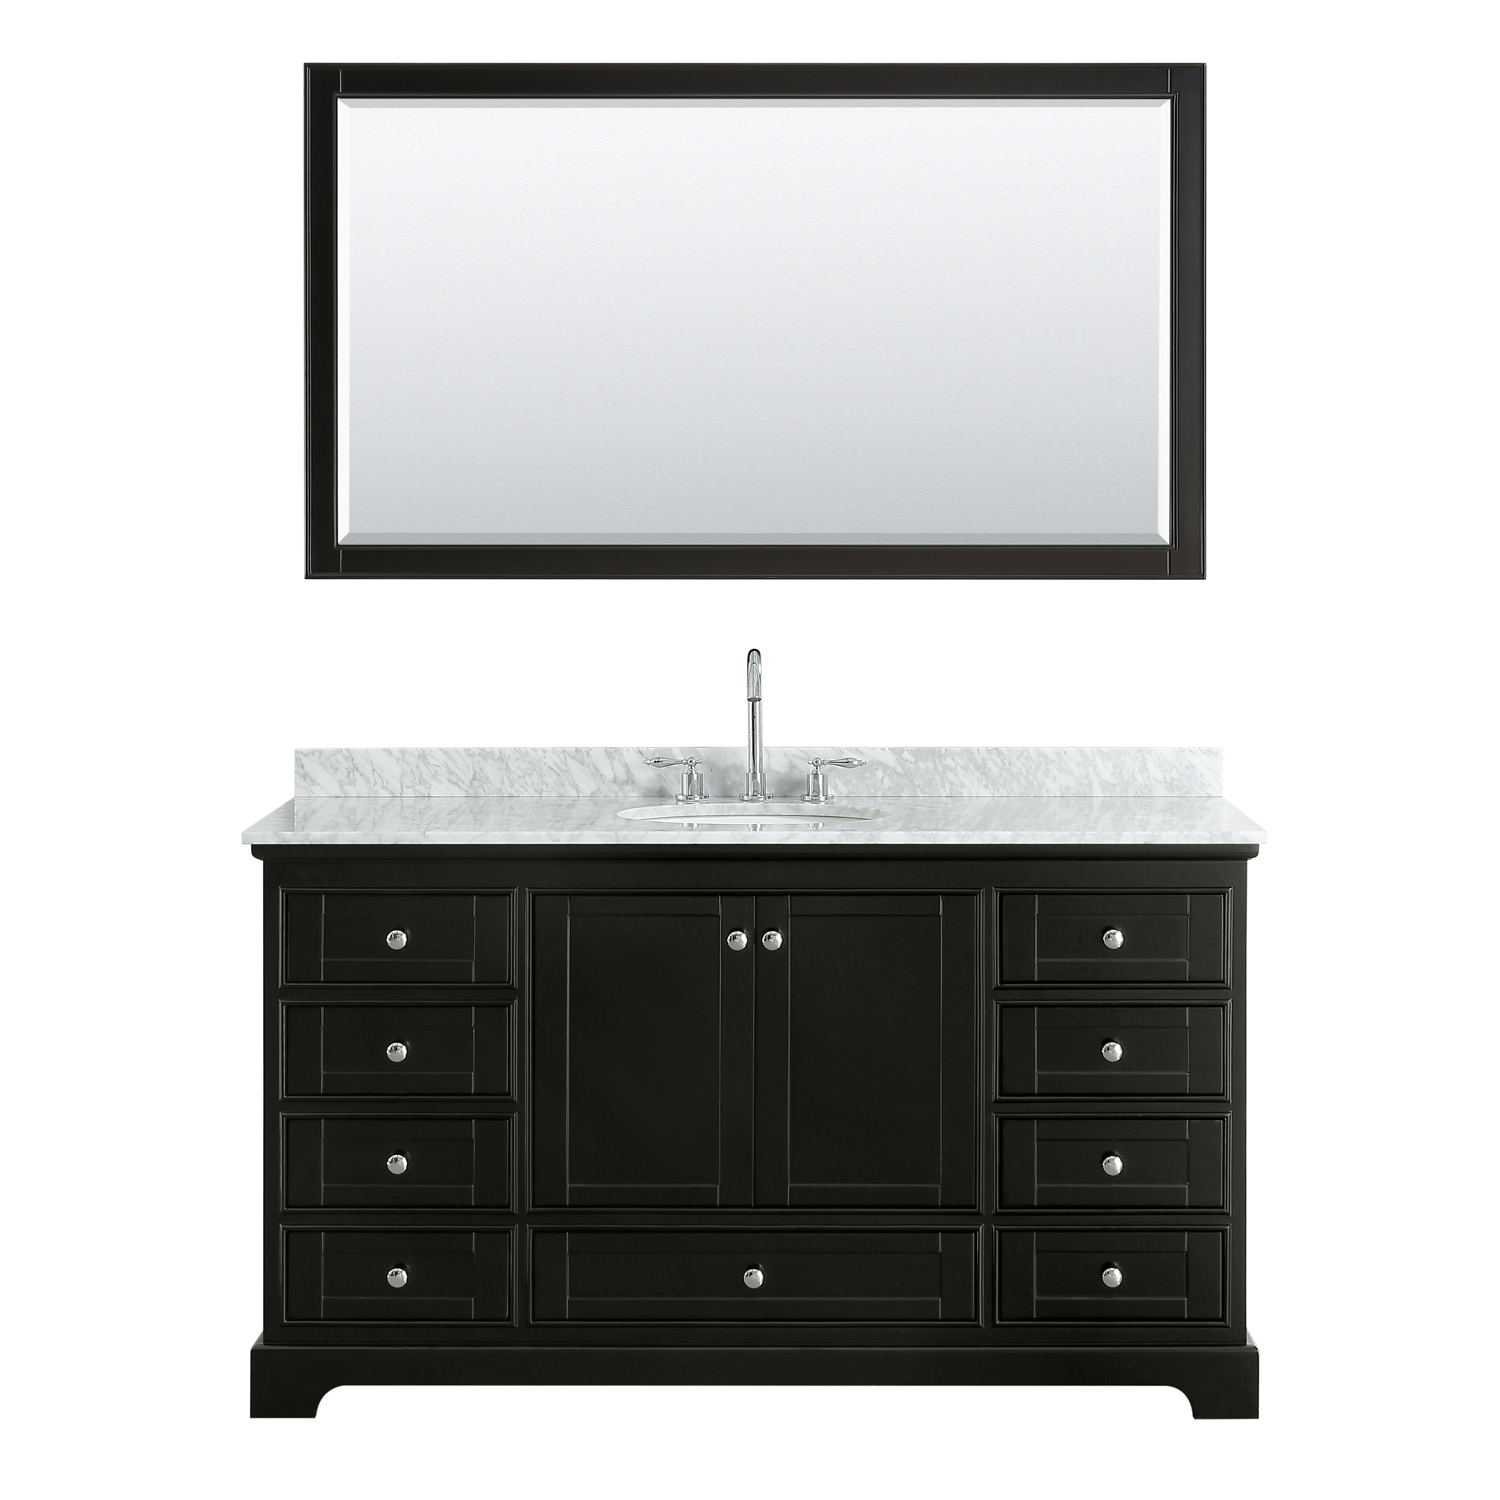 60" Single Bathroom Vanity in White Carrara Marble Countertop with Undermount Porcelain Sink, Medicine Cabinet, Mirror and Color Options